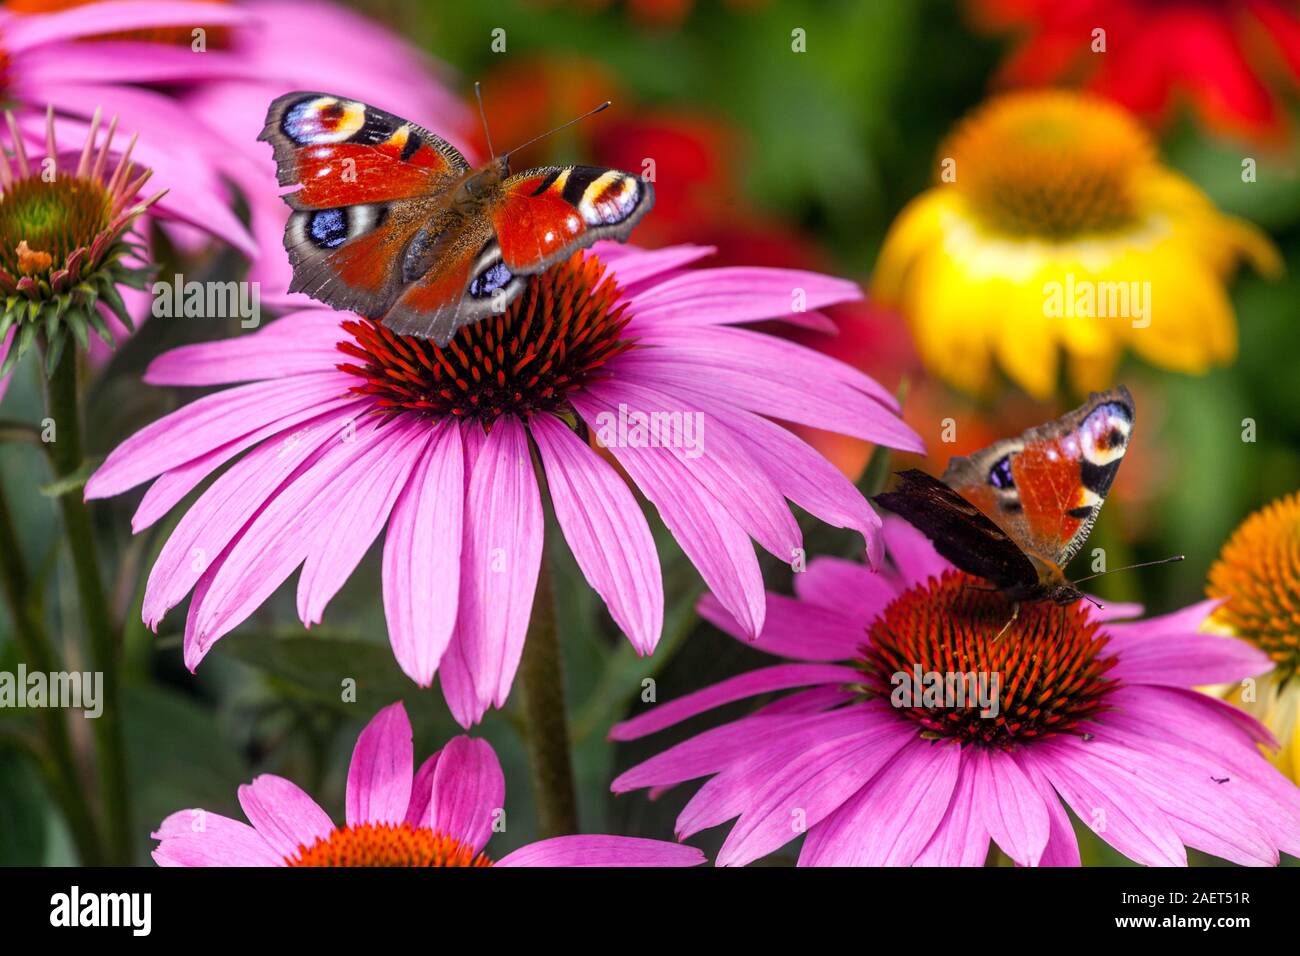 Two Peacock Butterfly garden flowers collecting nectar on flower Inachis io sitting on purple coneflower Echinacea Magnus Stock Photo